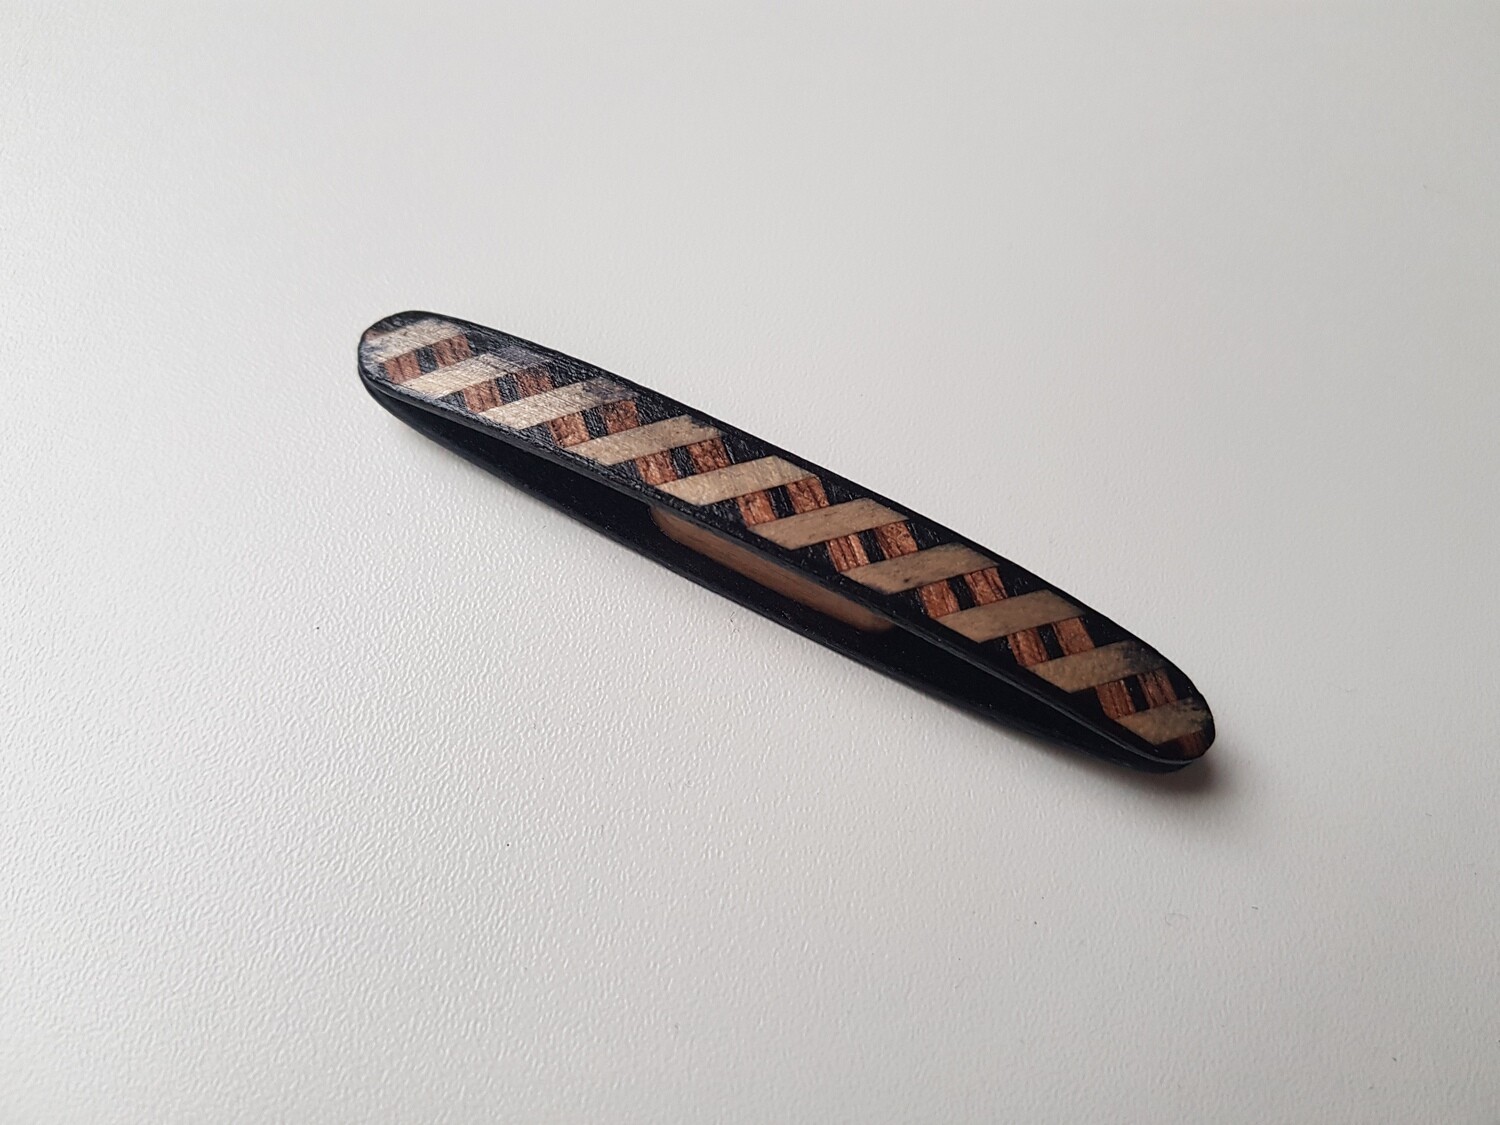 Beanile Tatting Shuttle Black Wood With Marquetry